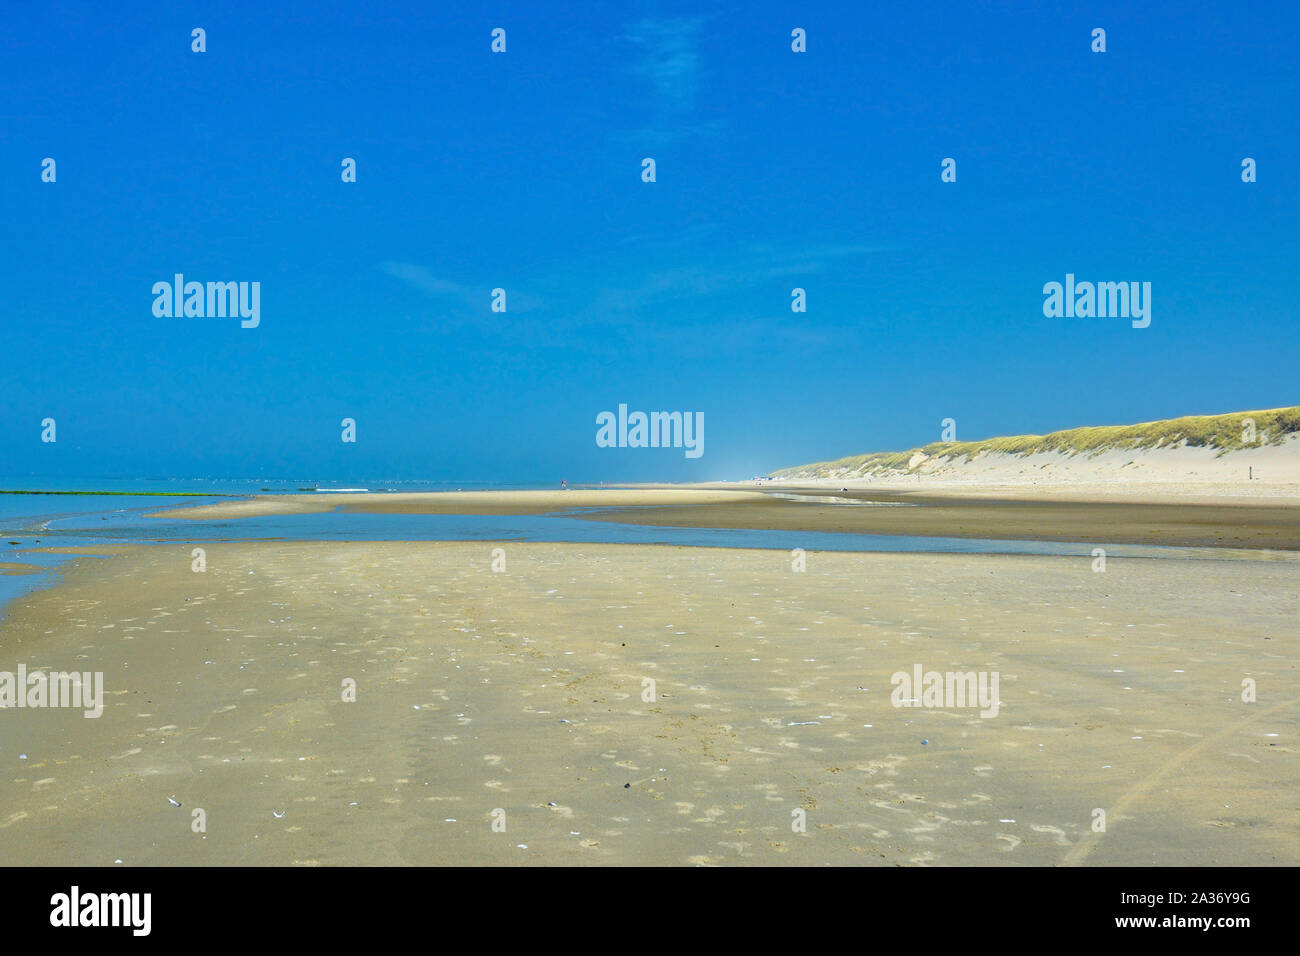 View over beautiful beach on district called 'Paal 9' on summer day with blue sky on North Sea island Texel in the Netherlands Stock Photo